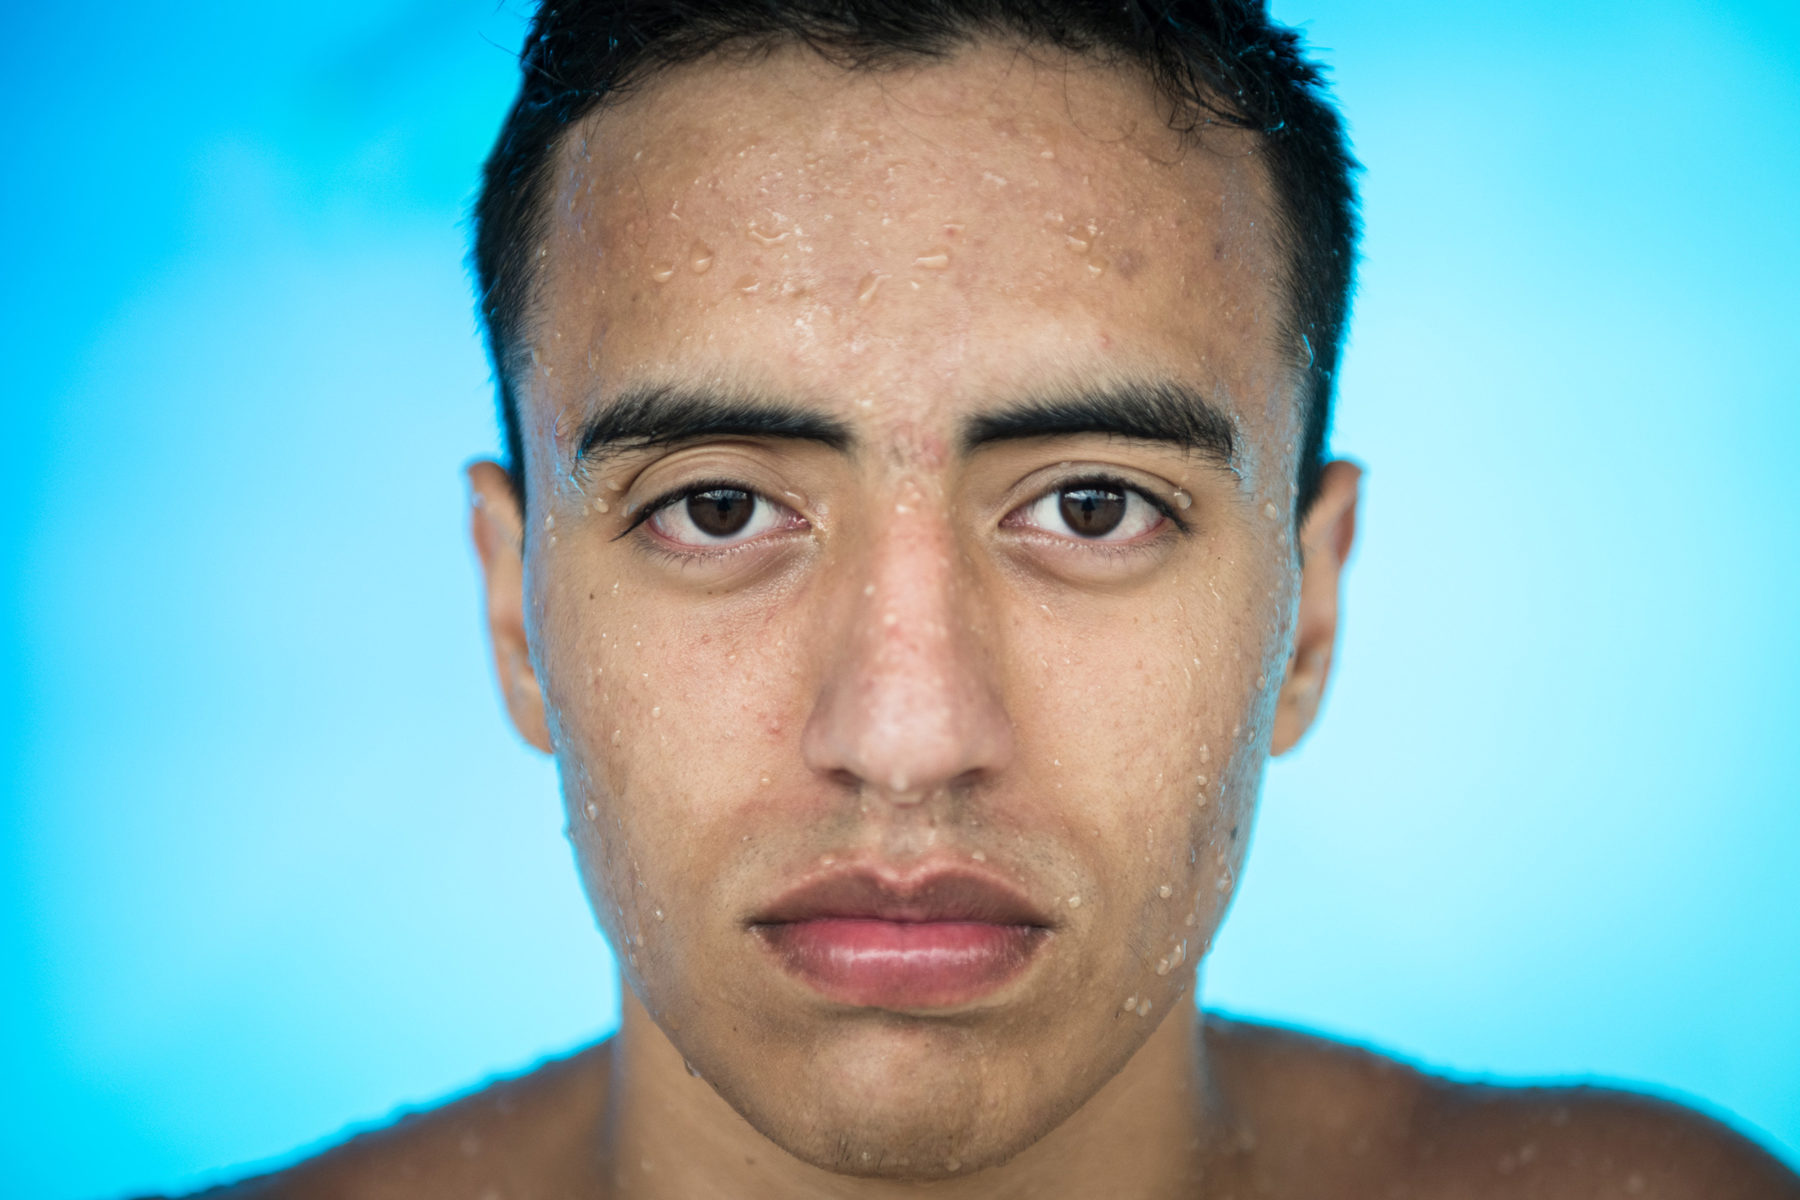 Daniel Londoño has been passionate about underwater hockey since he was 14 years old. He trains five days a week and takes part in tournaments on the weekends. He is the first in his family to leave Colombia thanks to the sport. In 2017, he flew with the national team to Australia for the World Cup. His dream is to become the world champion in England in 2019—once he gets the money for the trip together.